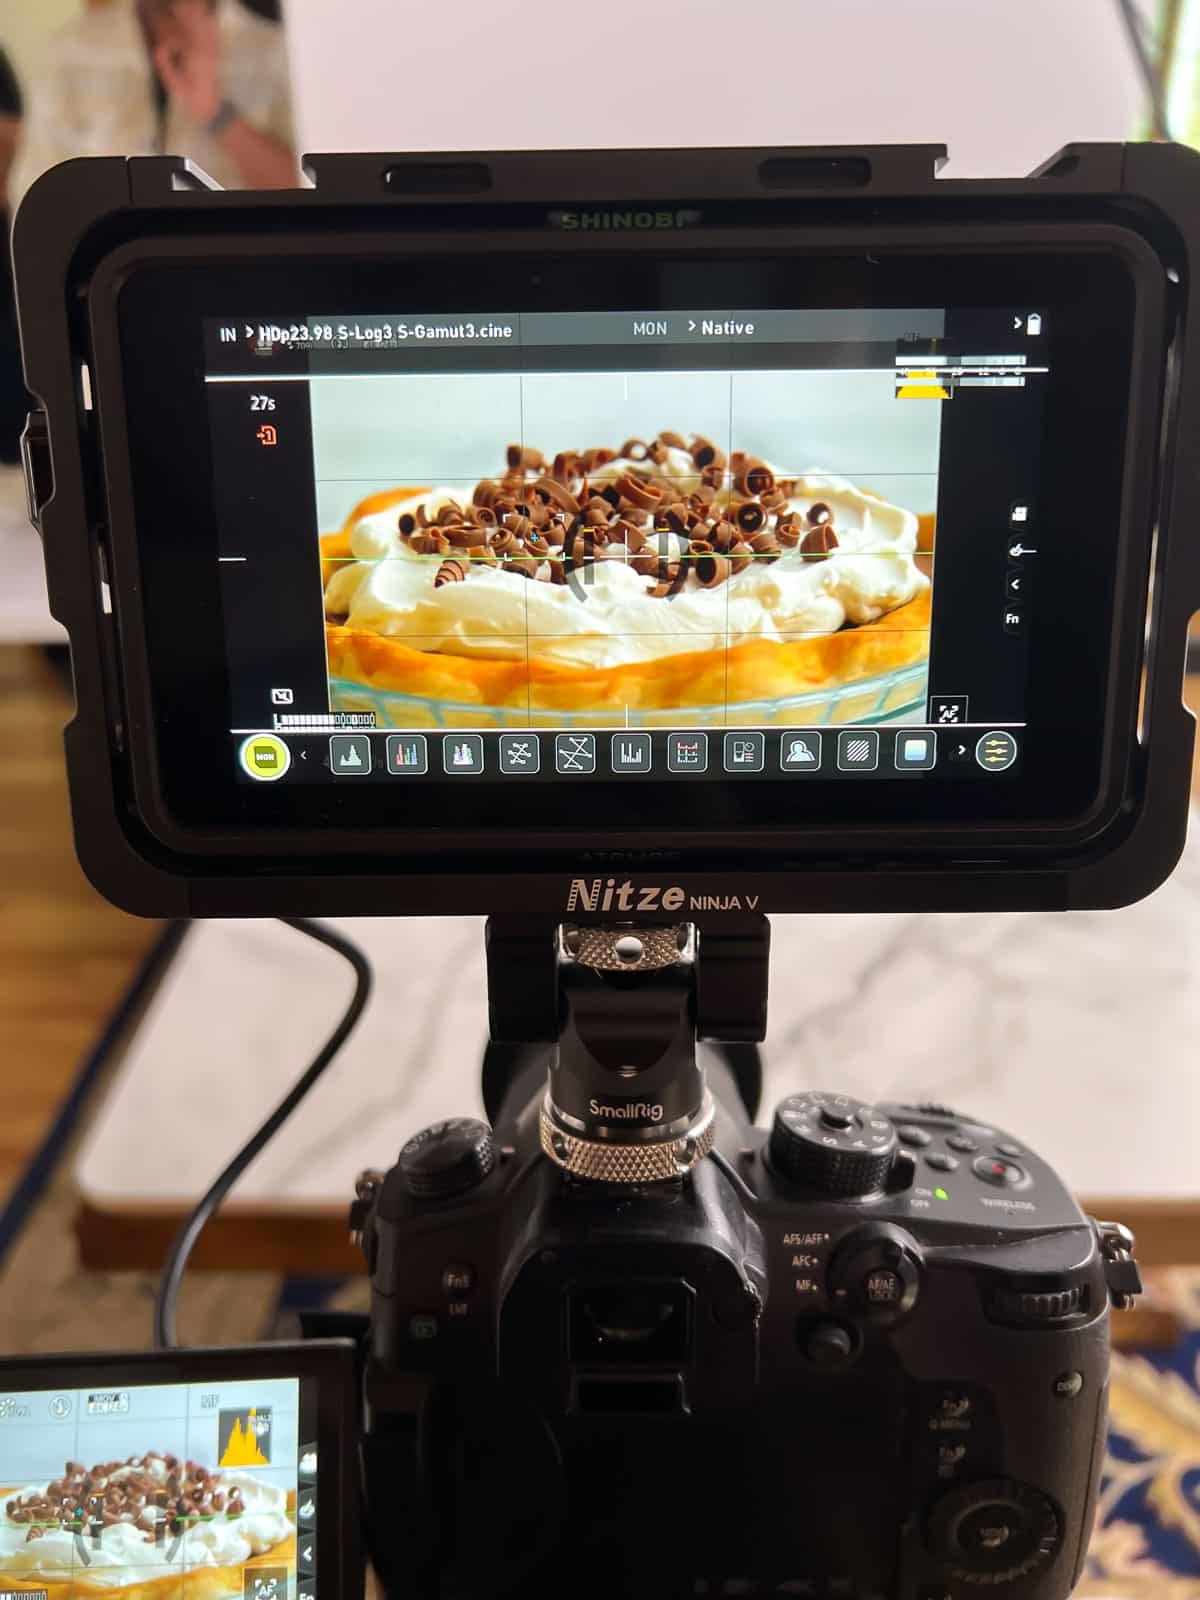 camera screen showing French silk pie with chocolate curls on top.